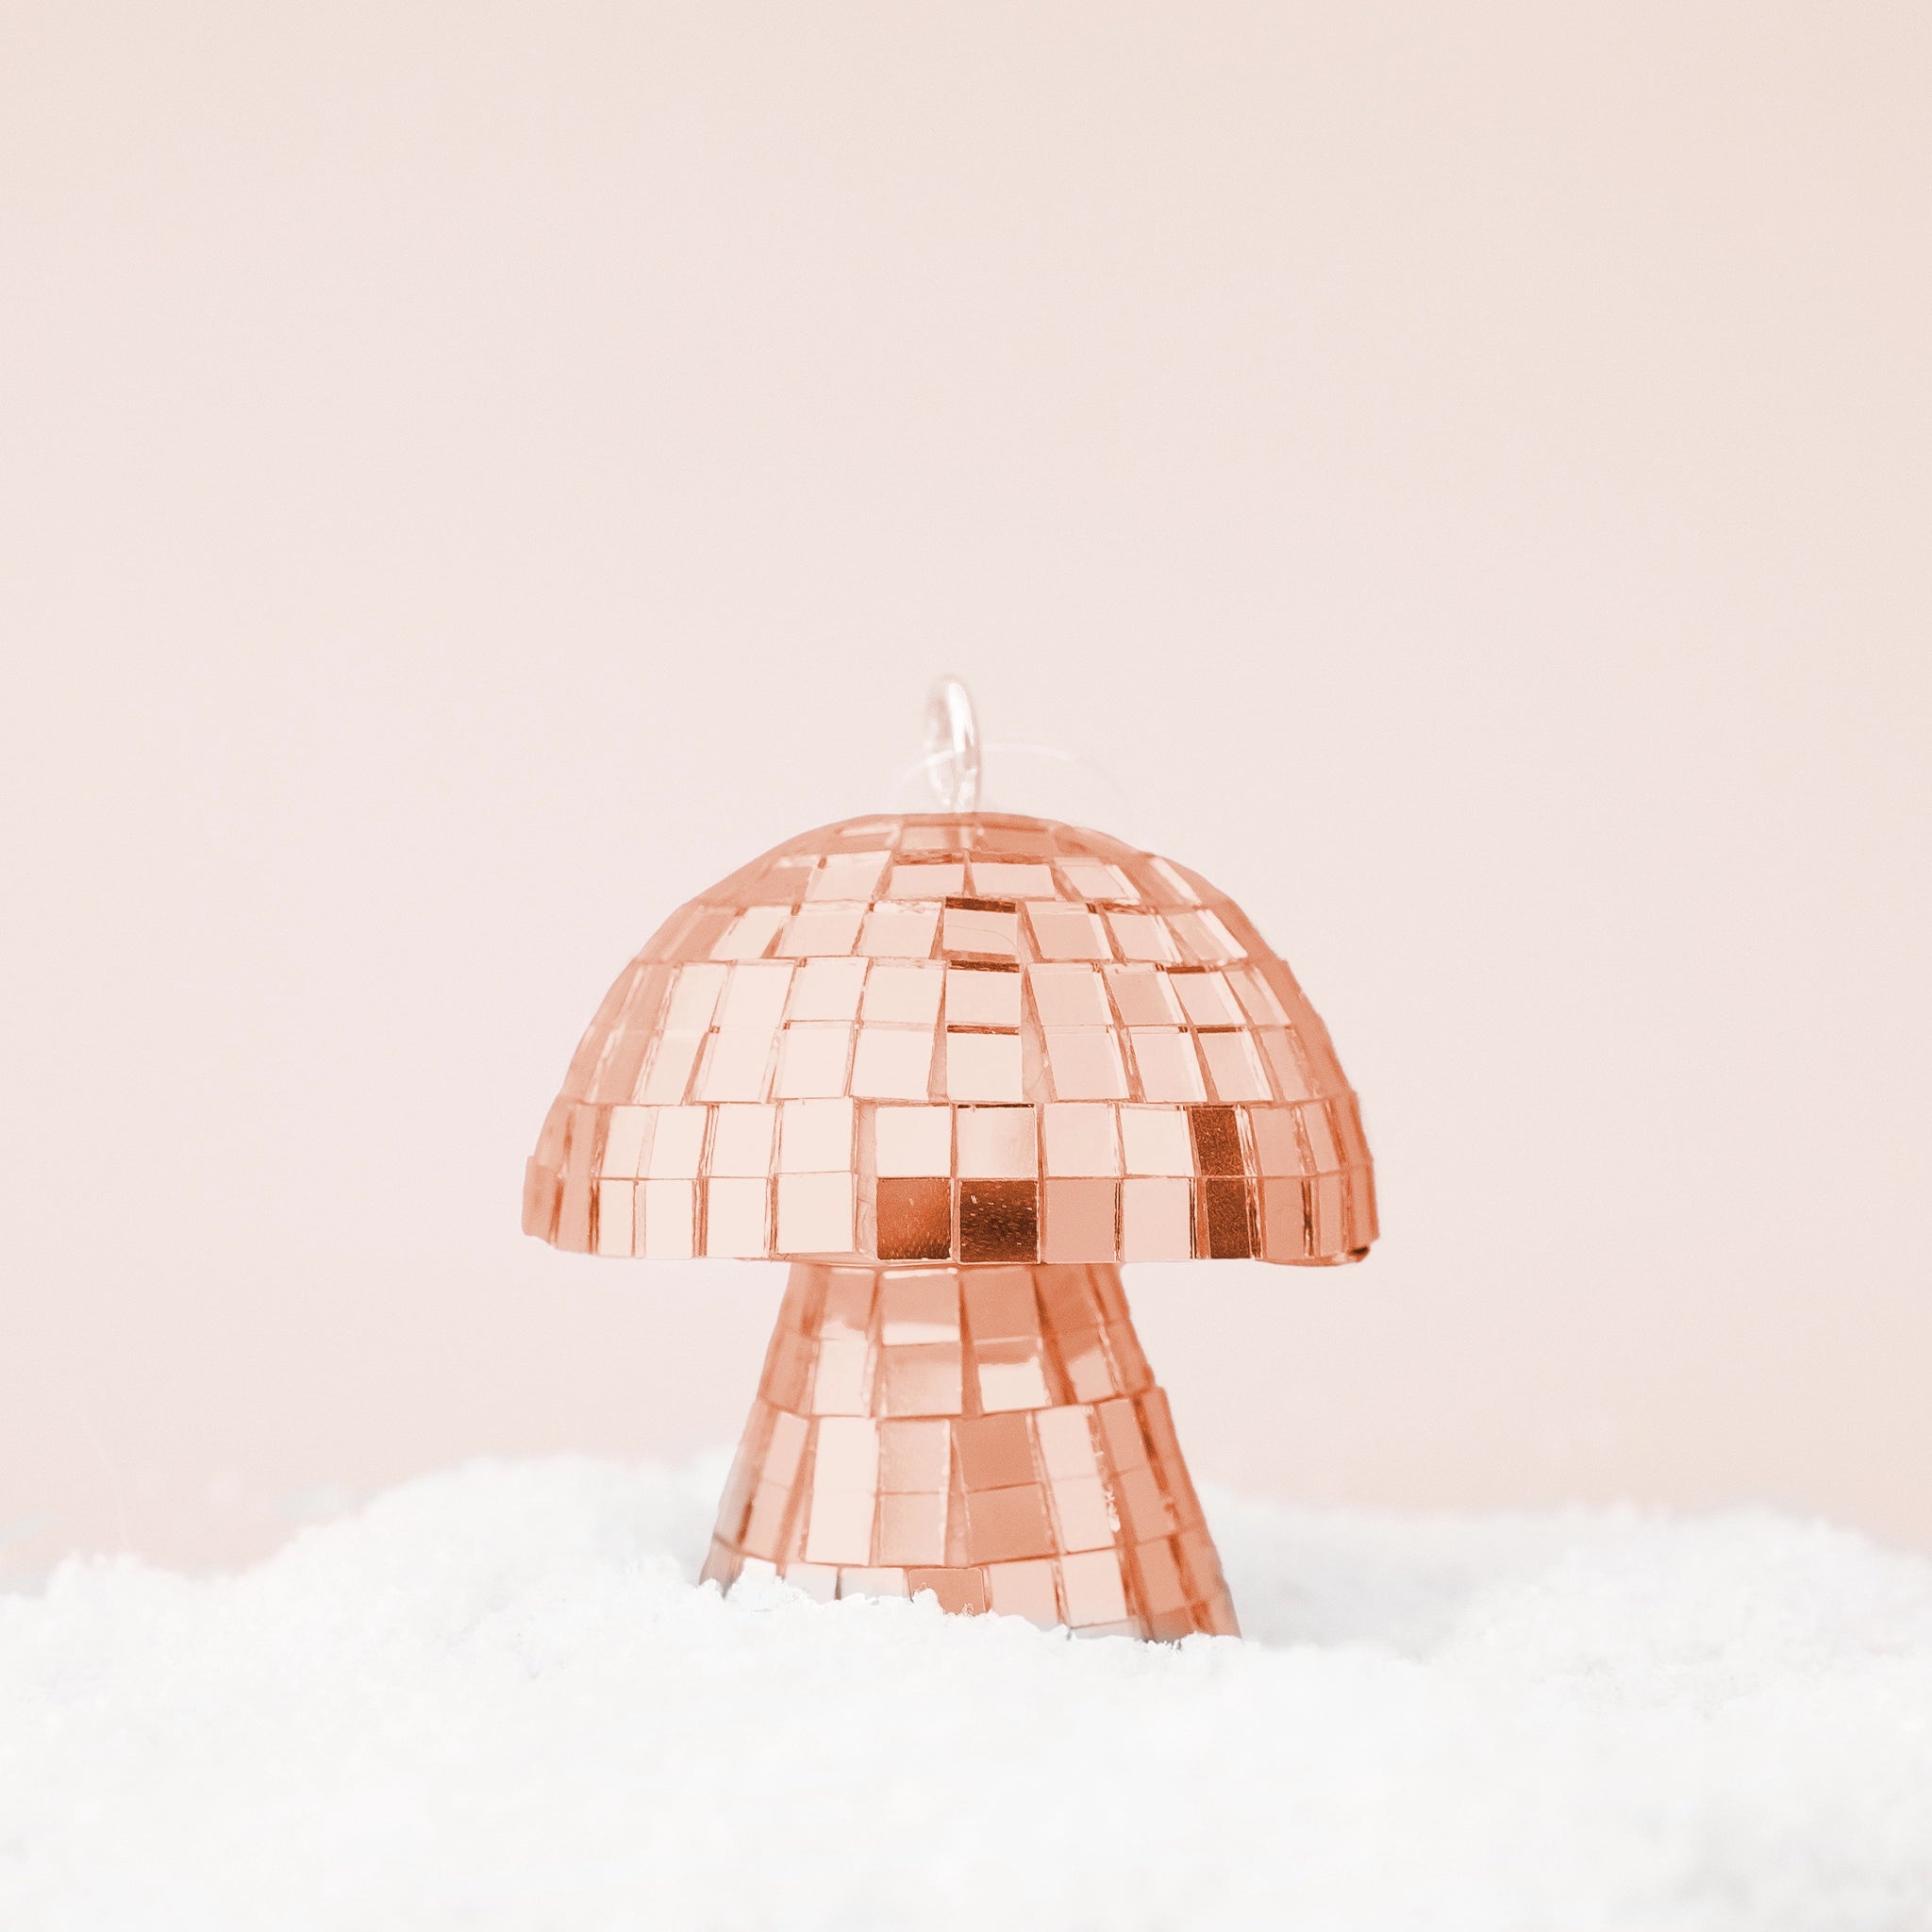 On a neutral snowy background is a rose gold disco mushroom shaped ornament.